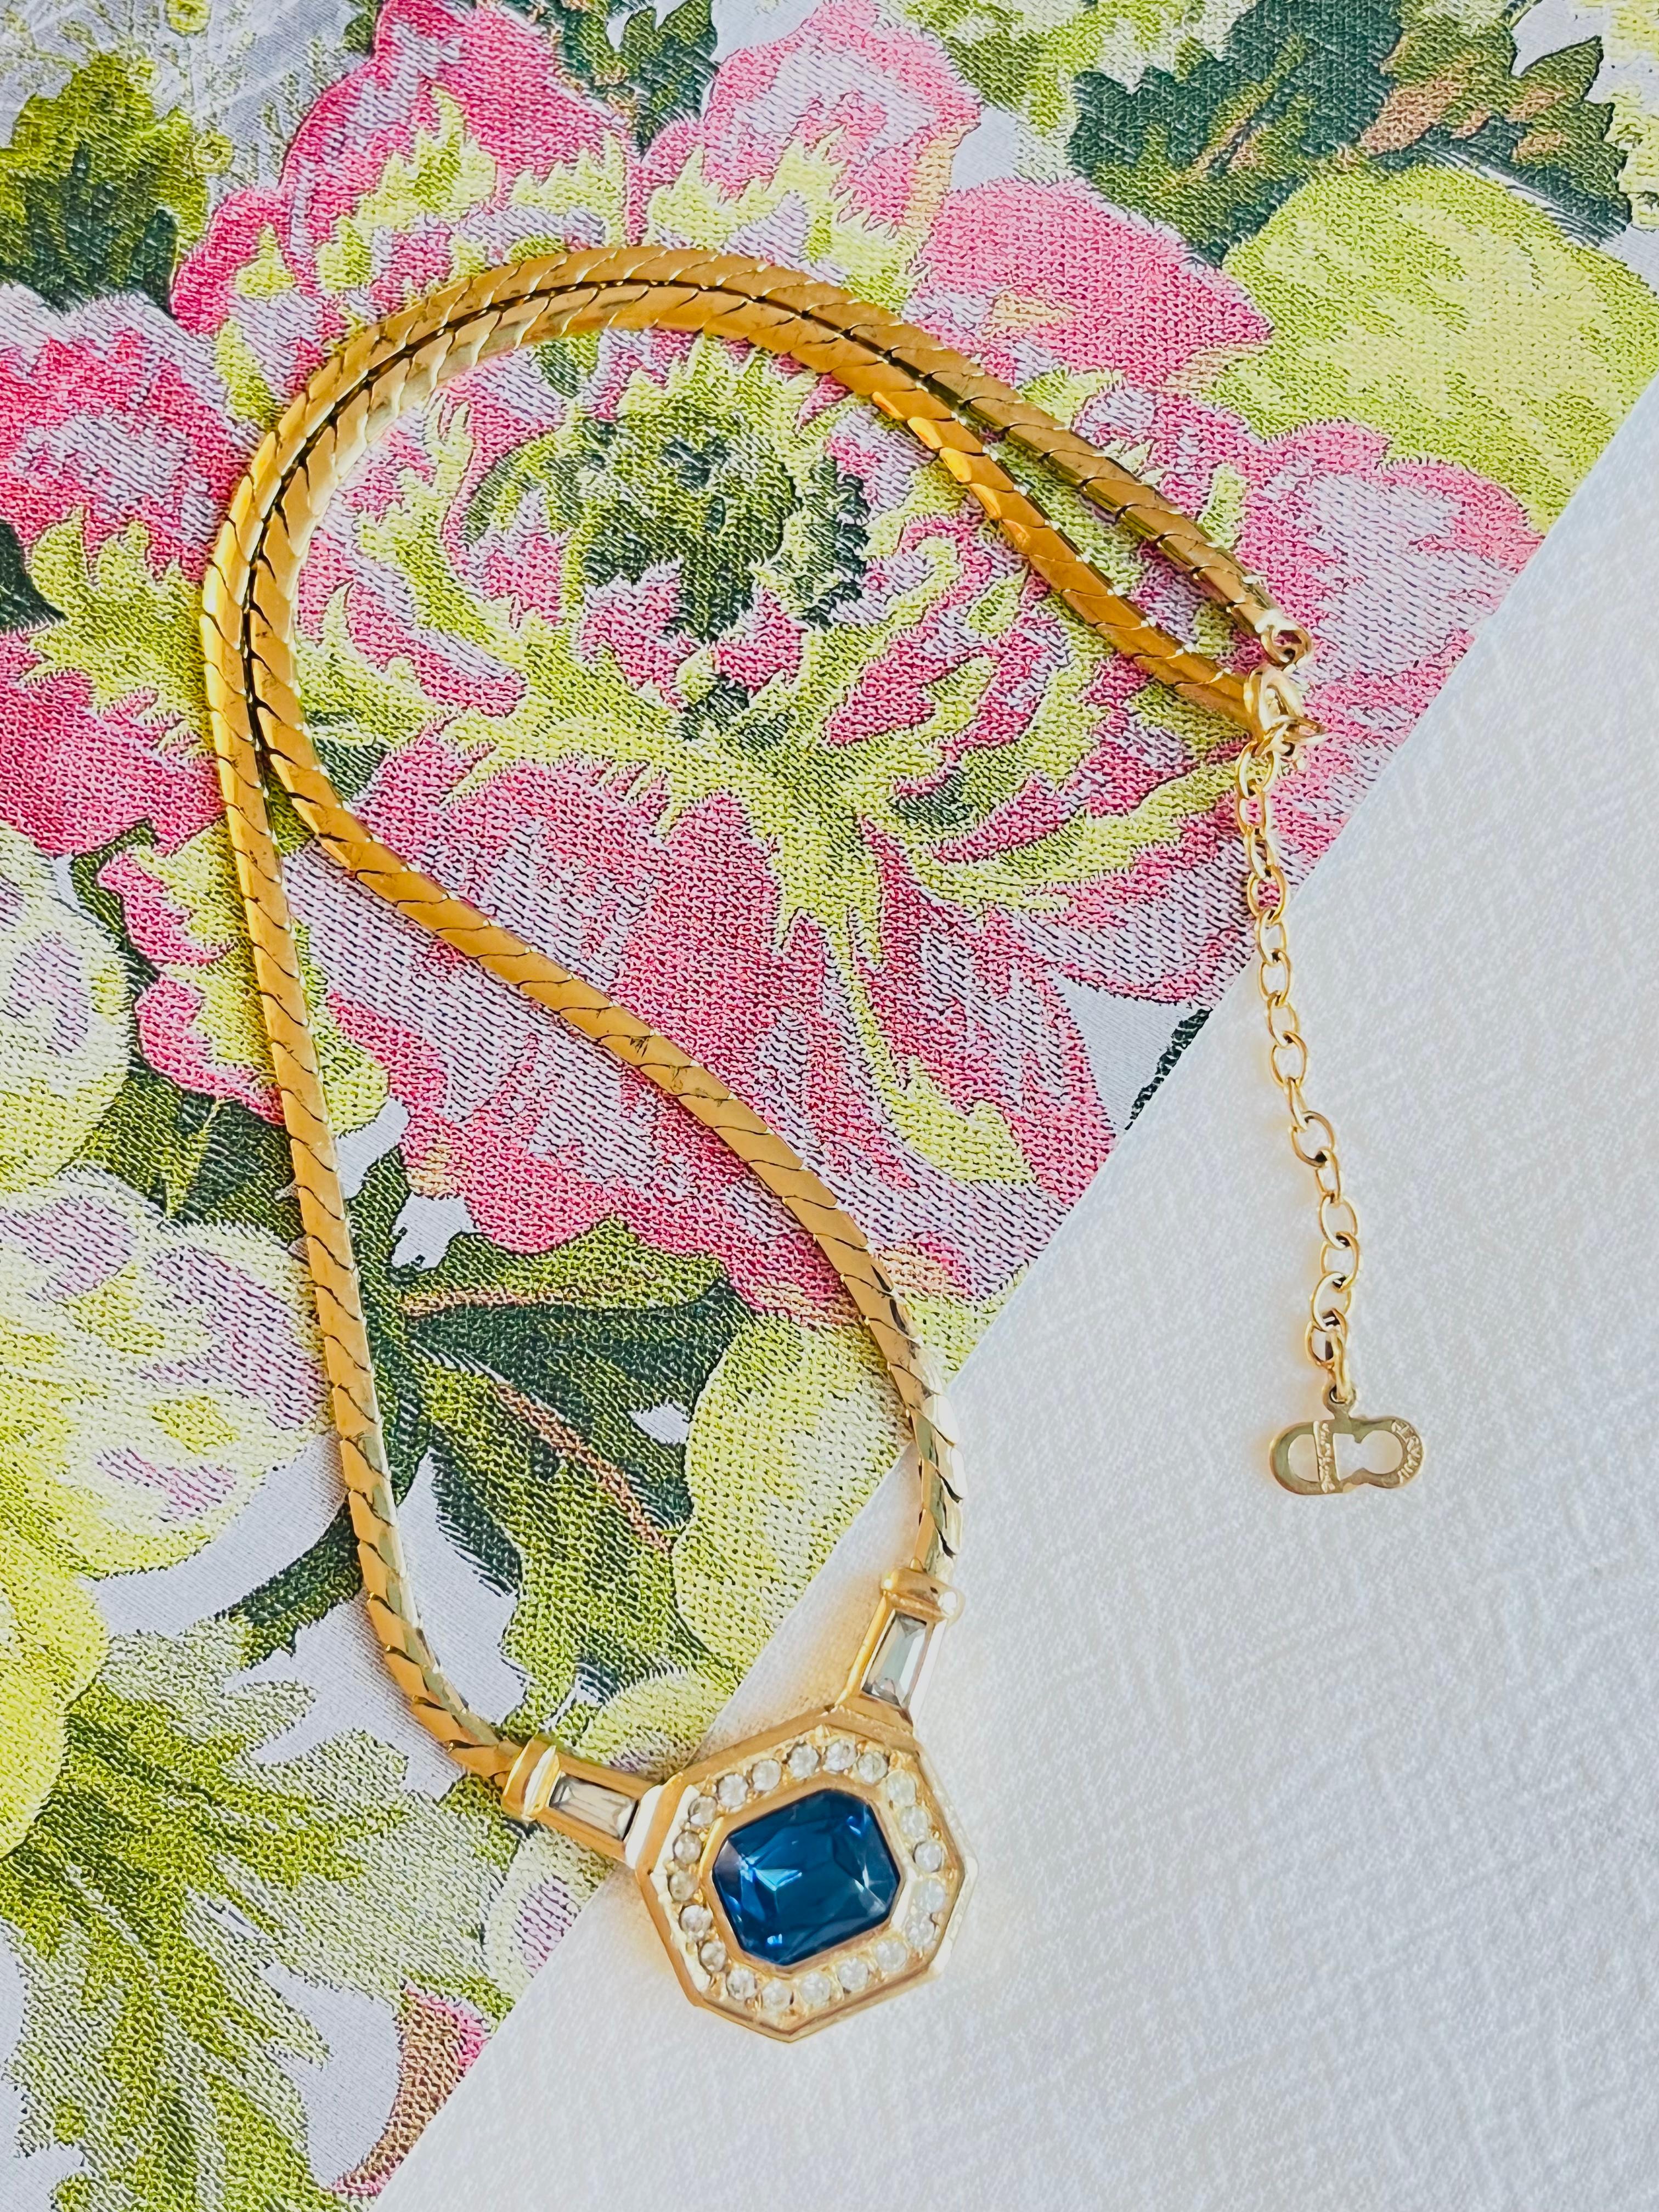 Christian Dior Vintage 1980s Gripoix Sapphire Crystal Octagon Pendant Necklace In Excellent Condition For Sale In Wokingham, England